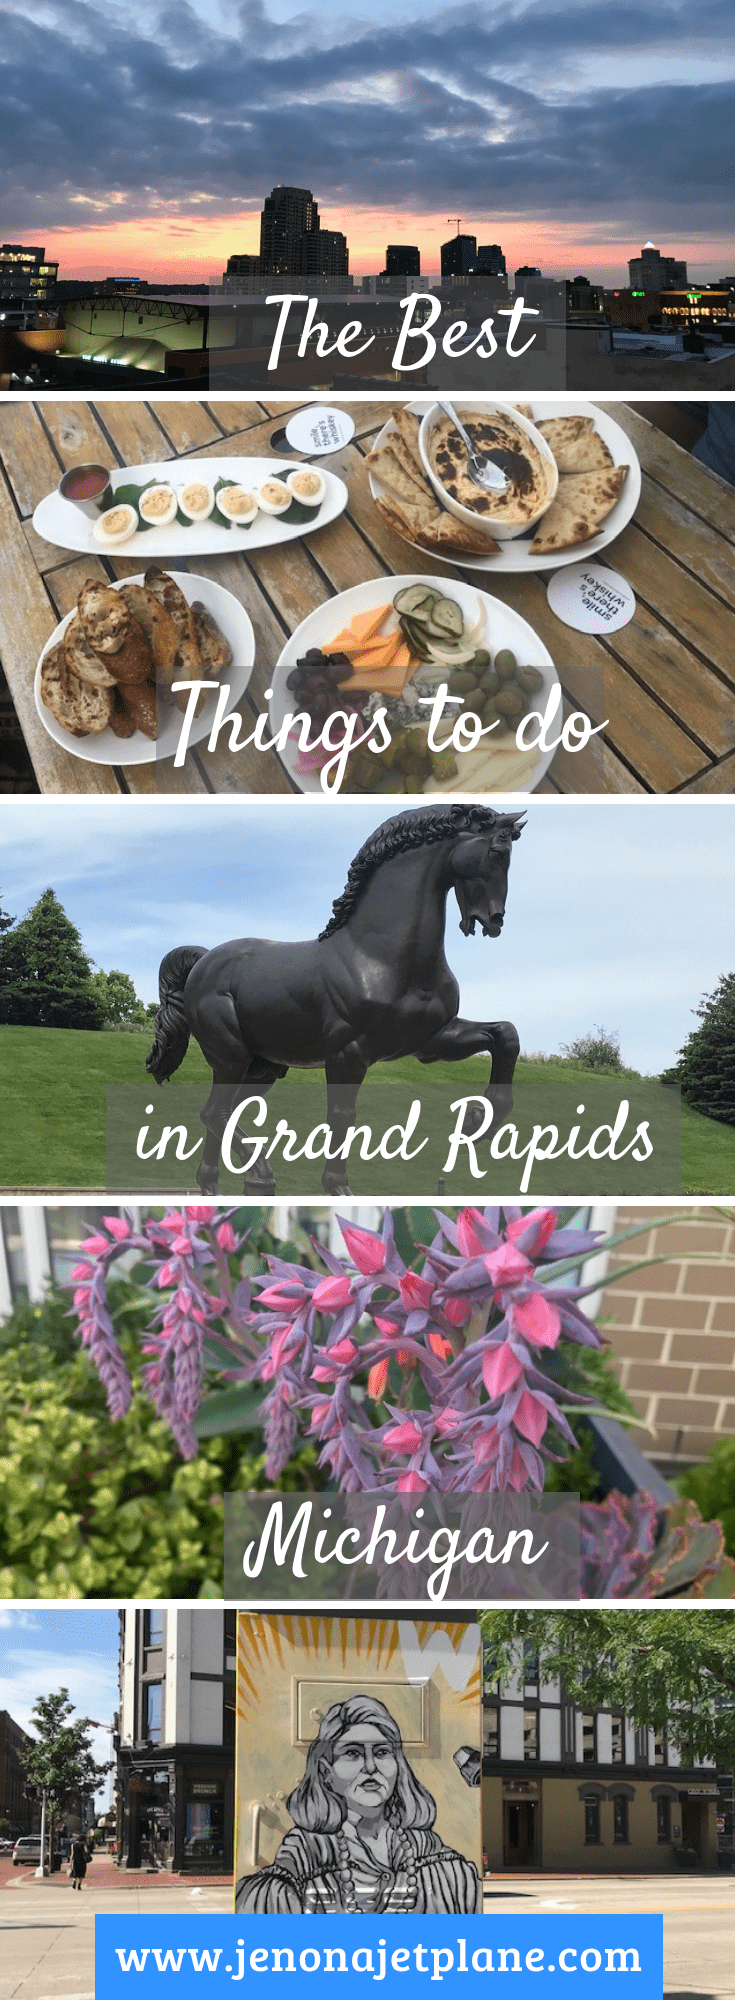 Looking for the best things to do in Grand Rapids, Michigan? From rooftop bars to street art finds, here 12 activities you can't miss! #grandrapidsMI #michigantravel #experiencegrandrapids #thingstodograndrapids